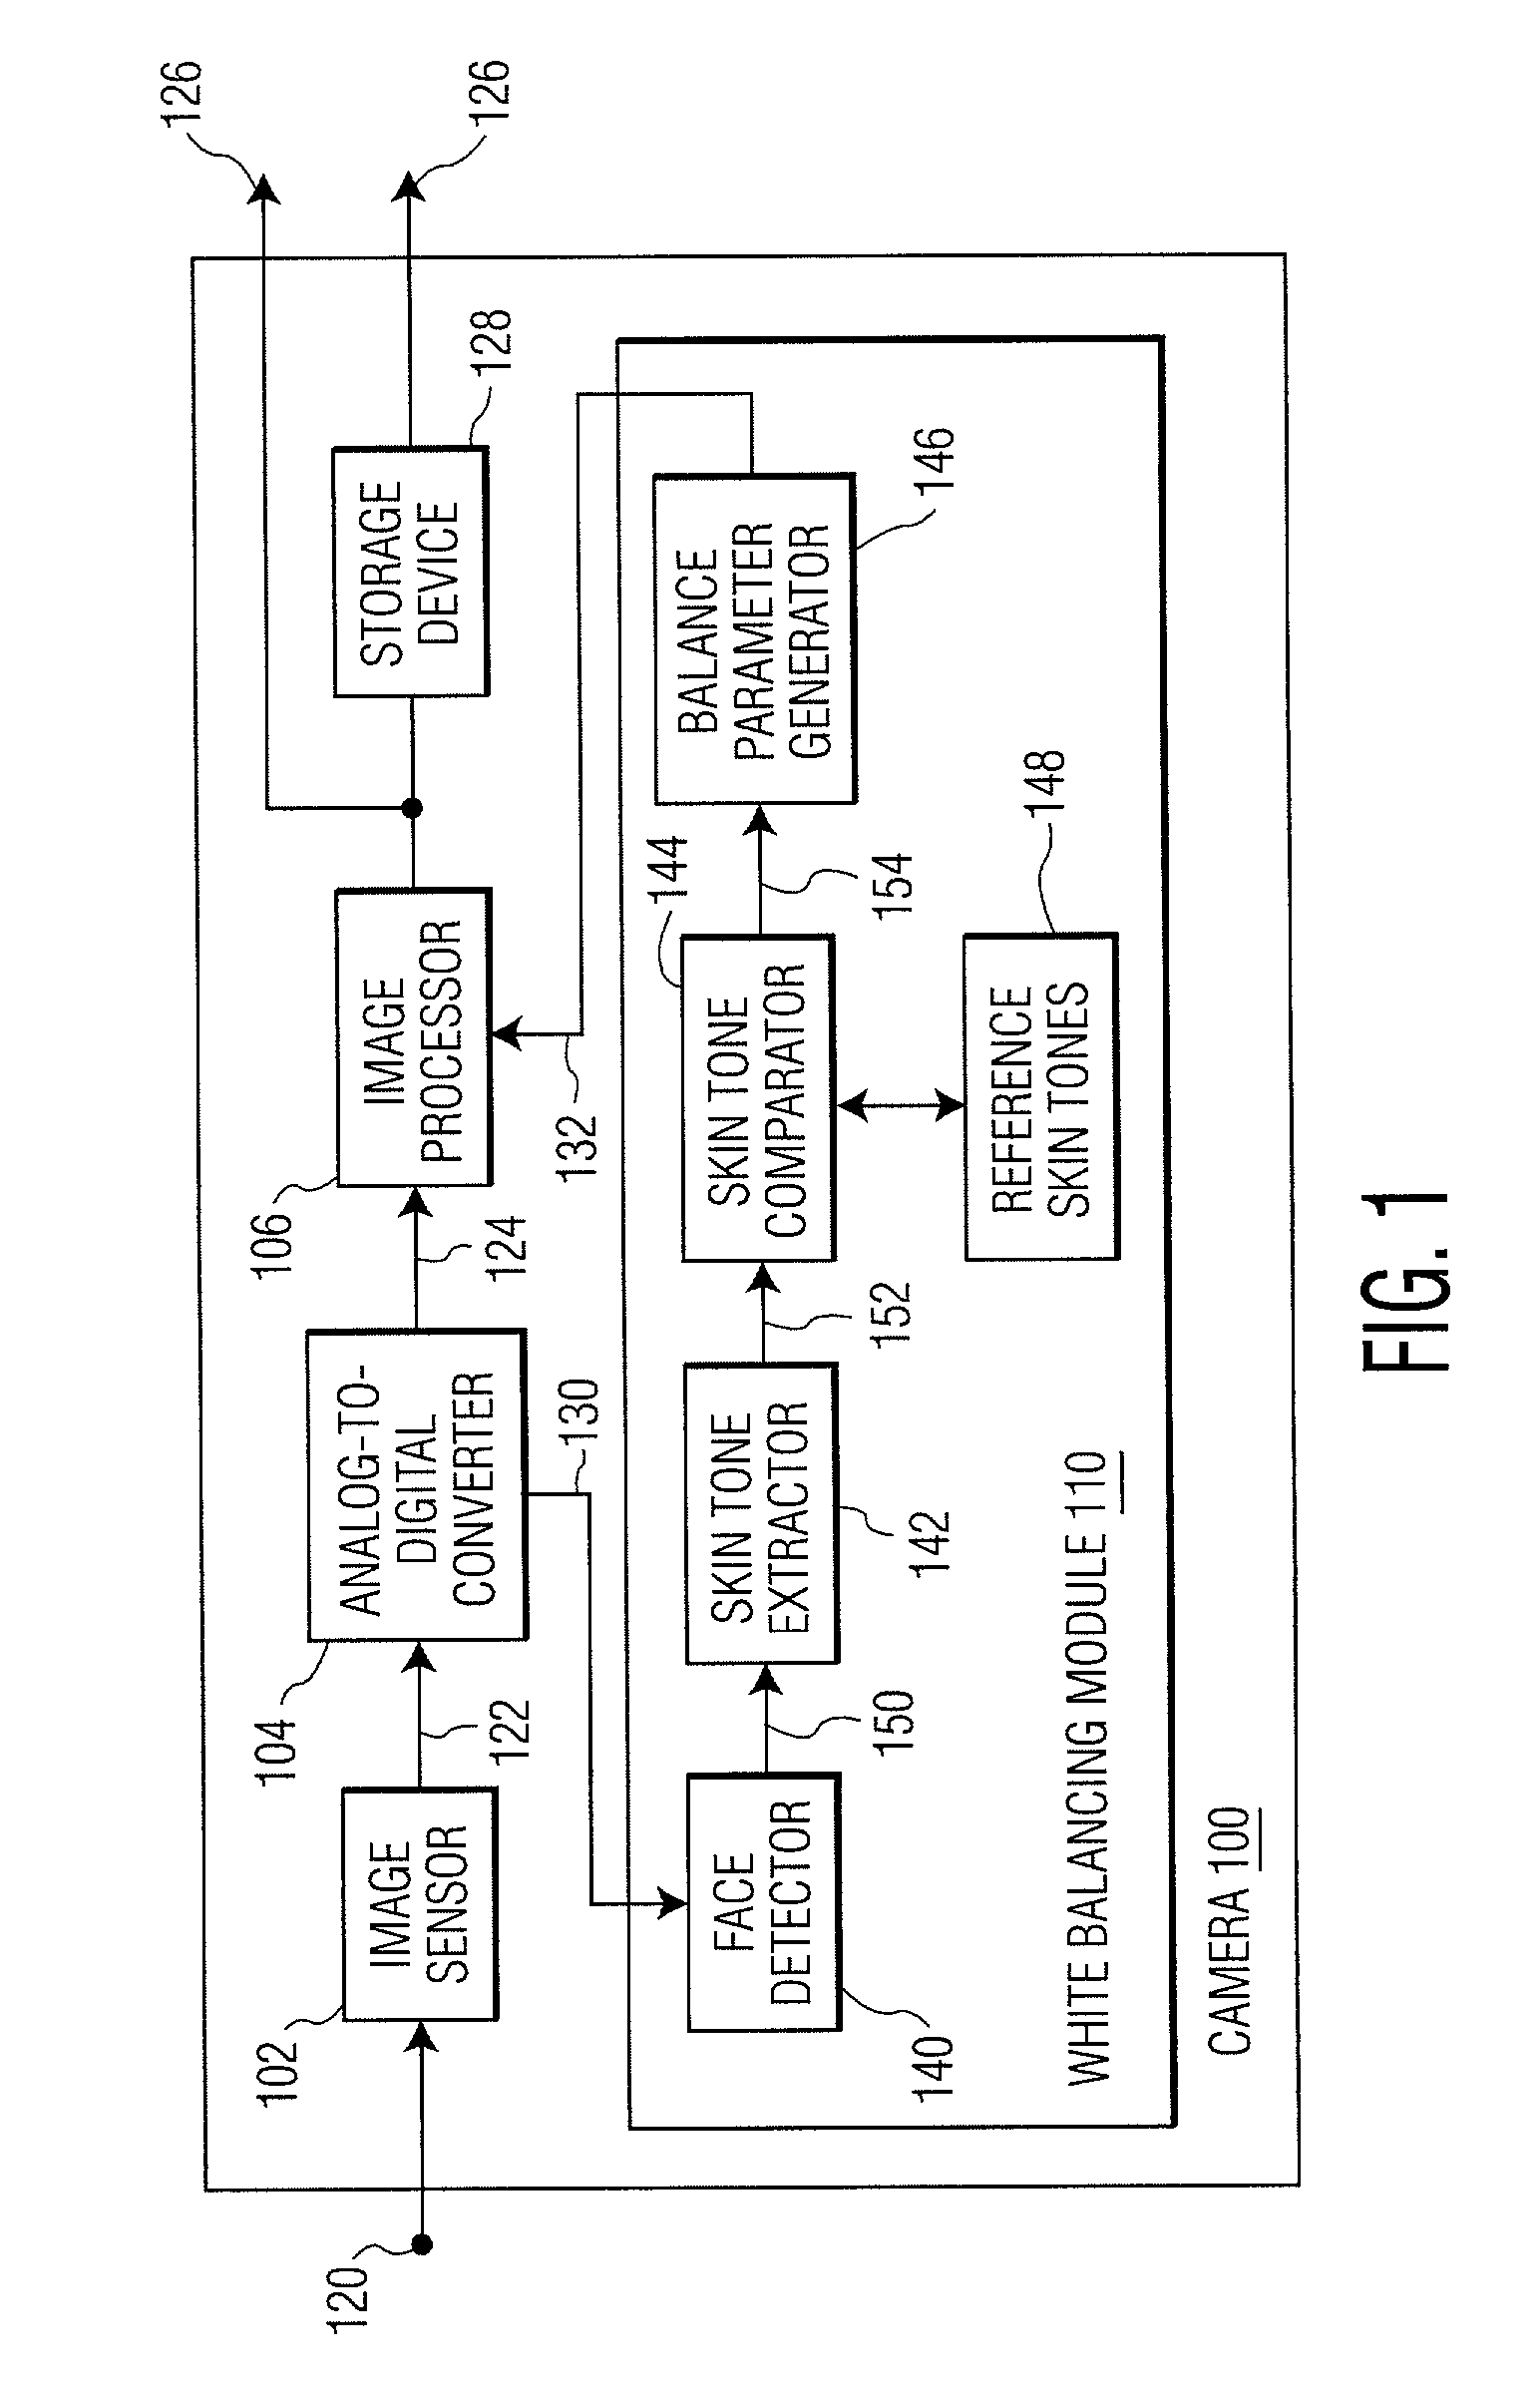 Method and system for white balancing images using facial color as a reference signal